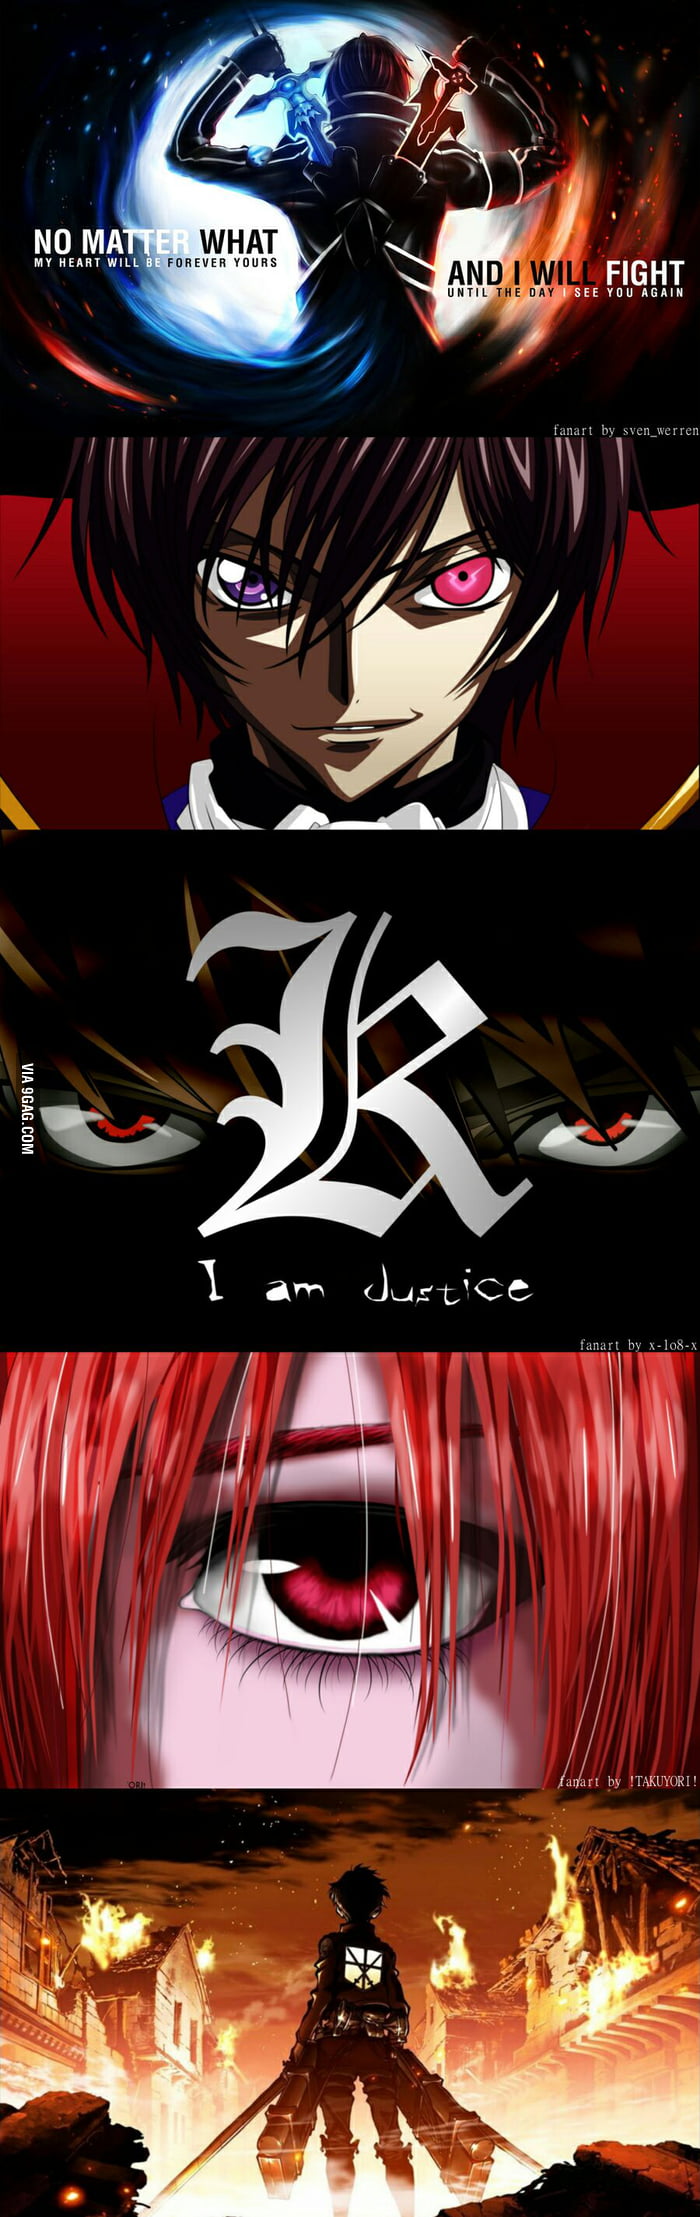 Another Awesome/Badass anime DRIFTERS - 9GAG